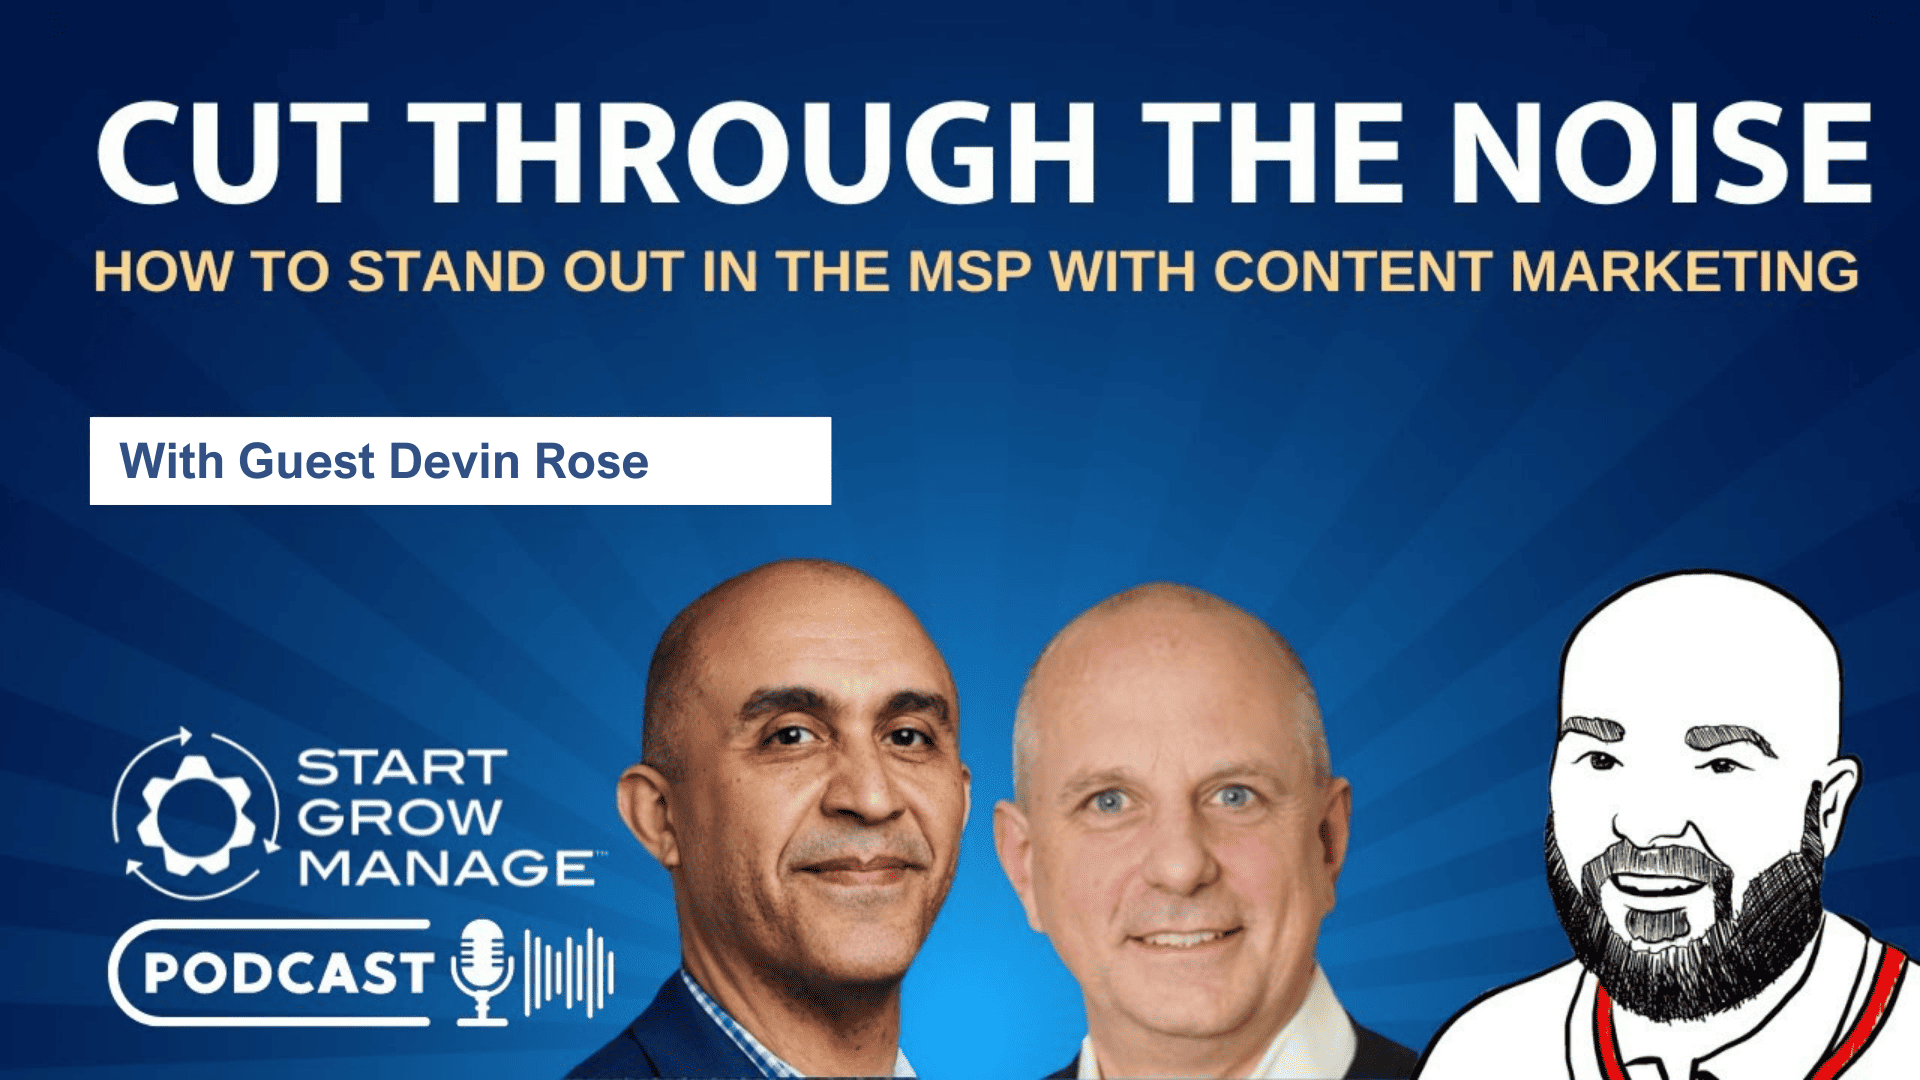 Podcast: Cut Through the Noise: How to Stand Out in the MSP with Content Marketing